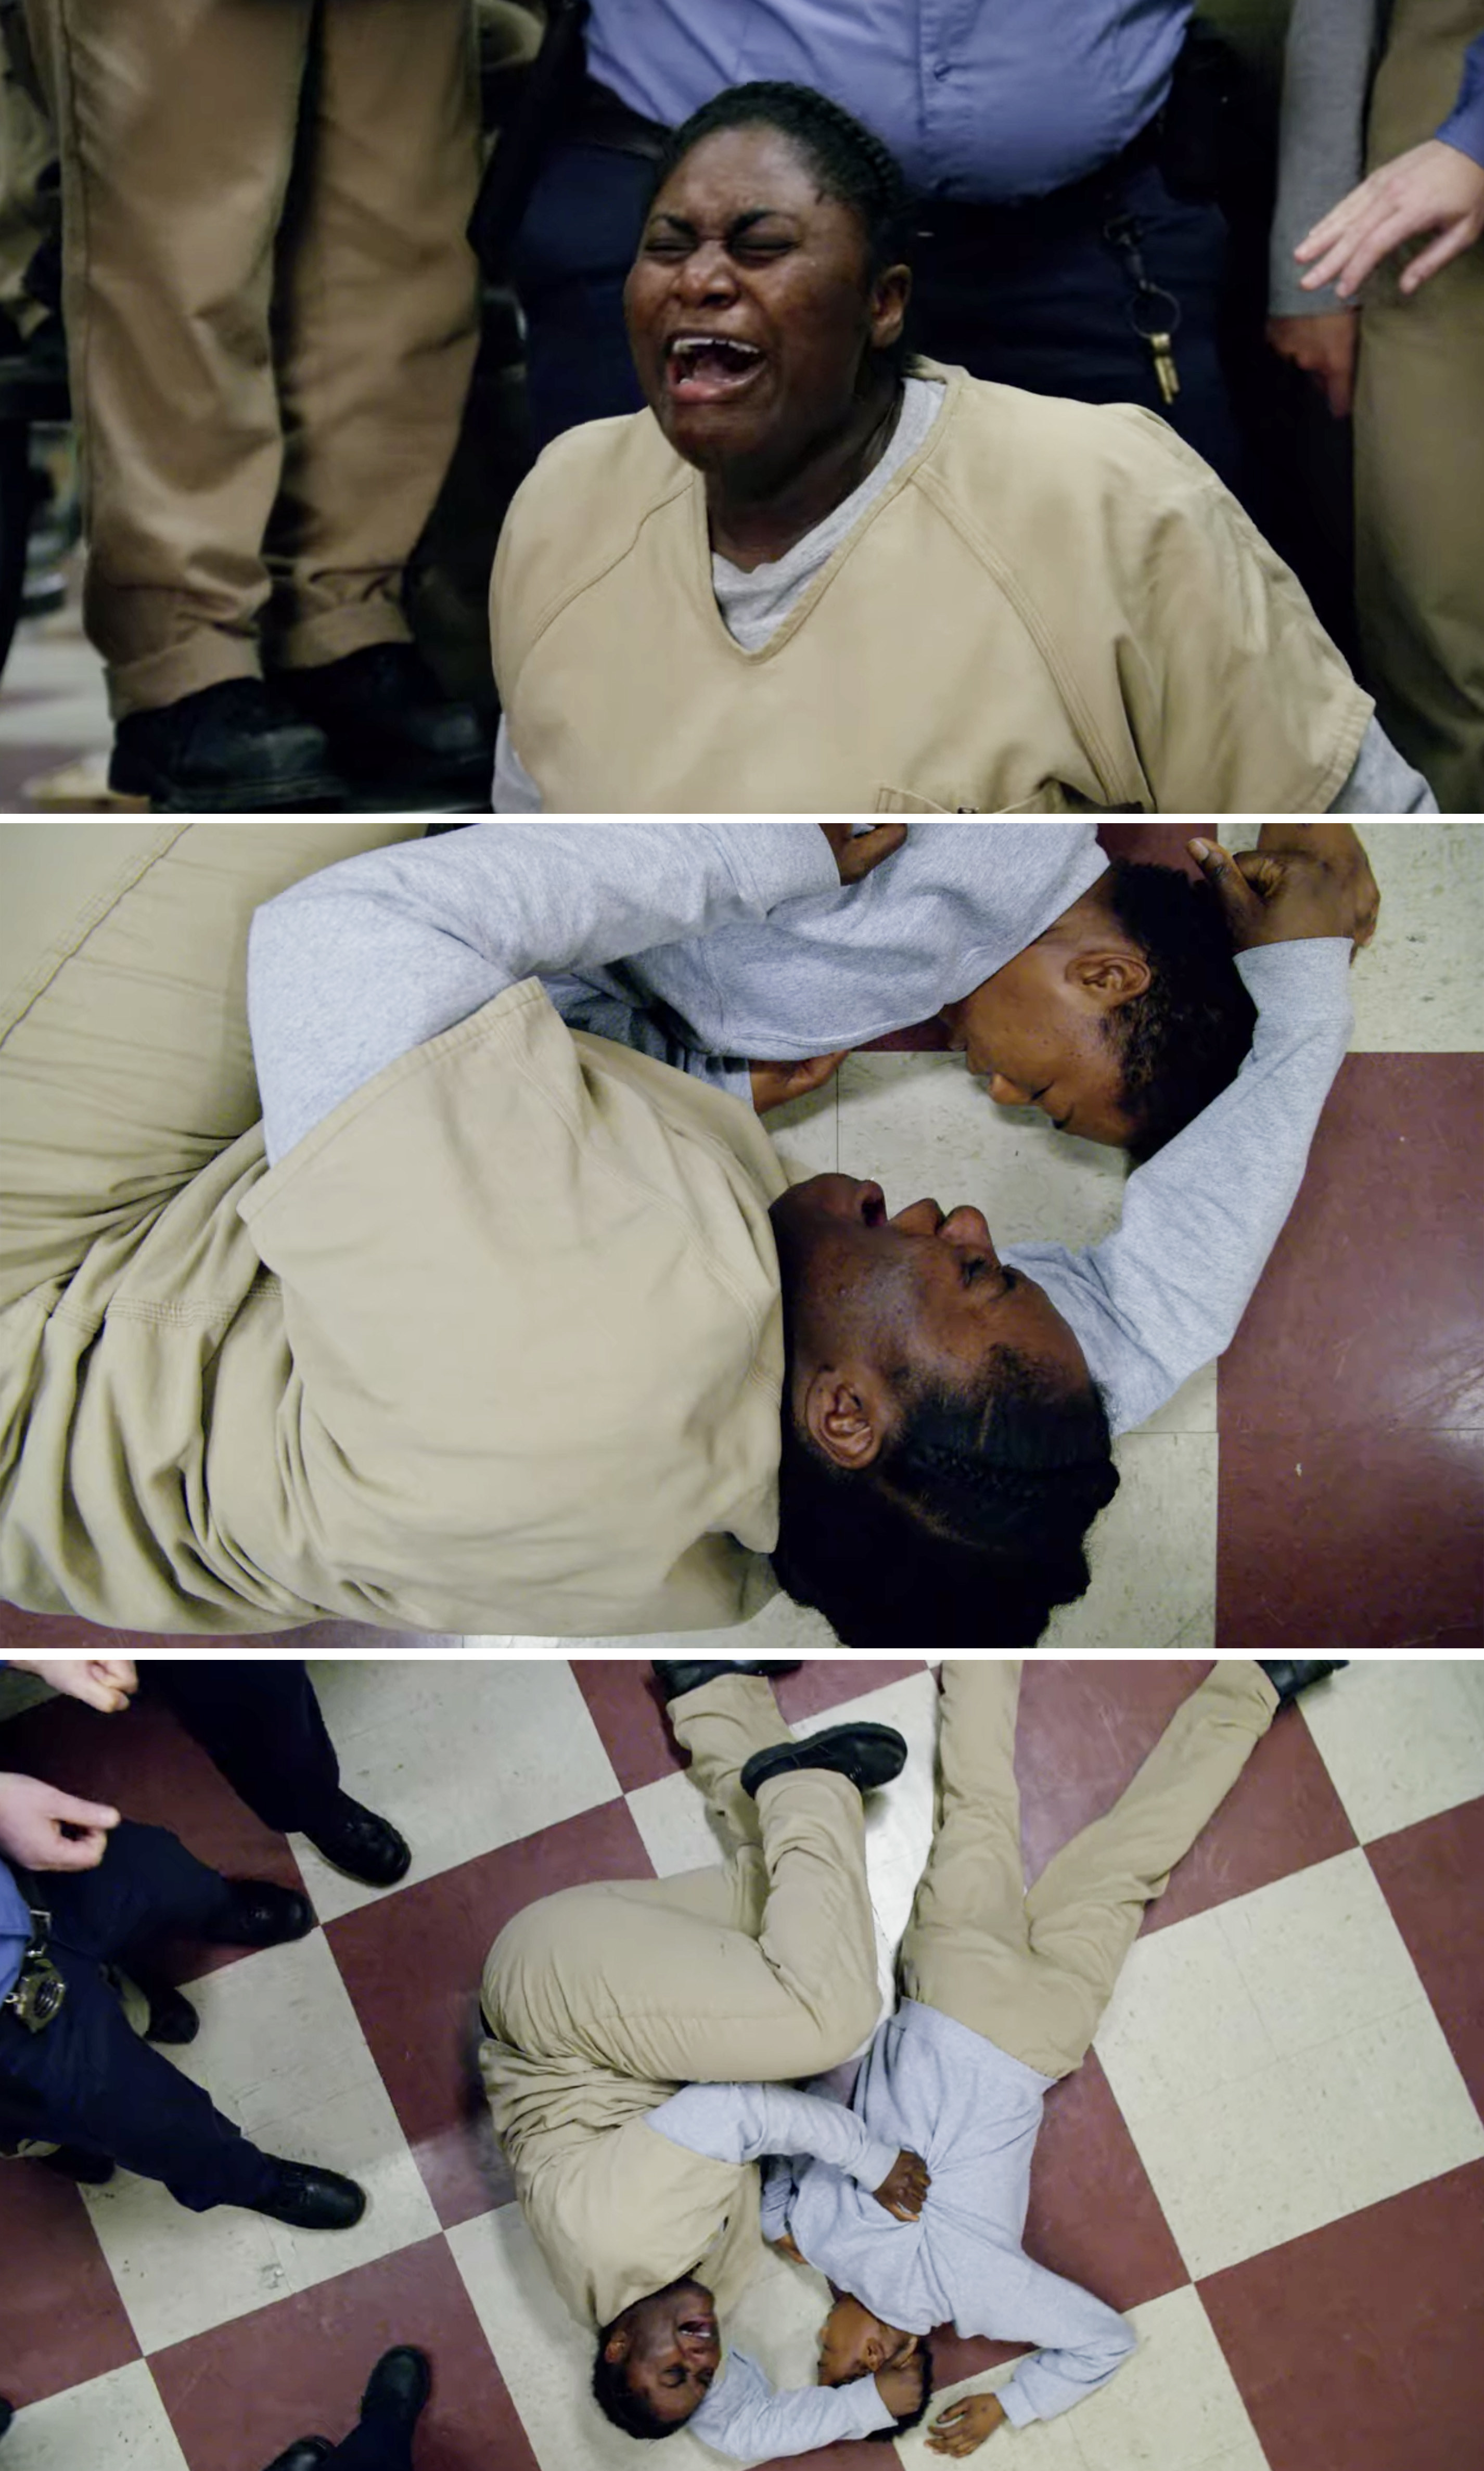 Poussey from &quot;Orange Is the New Black&quot; on the floor dying